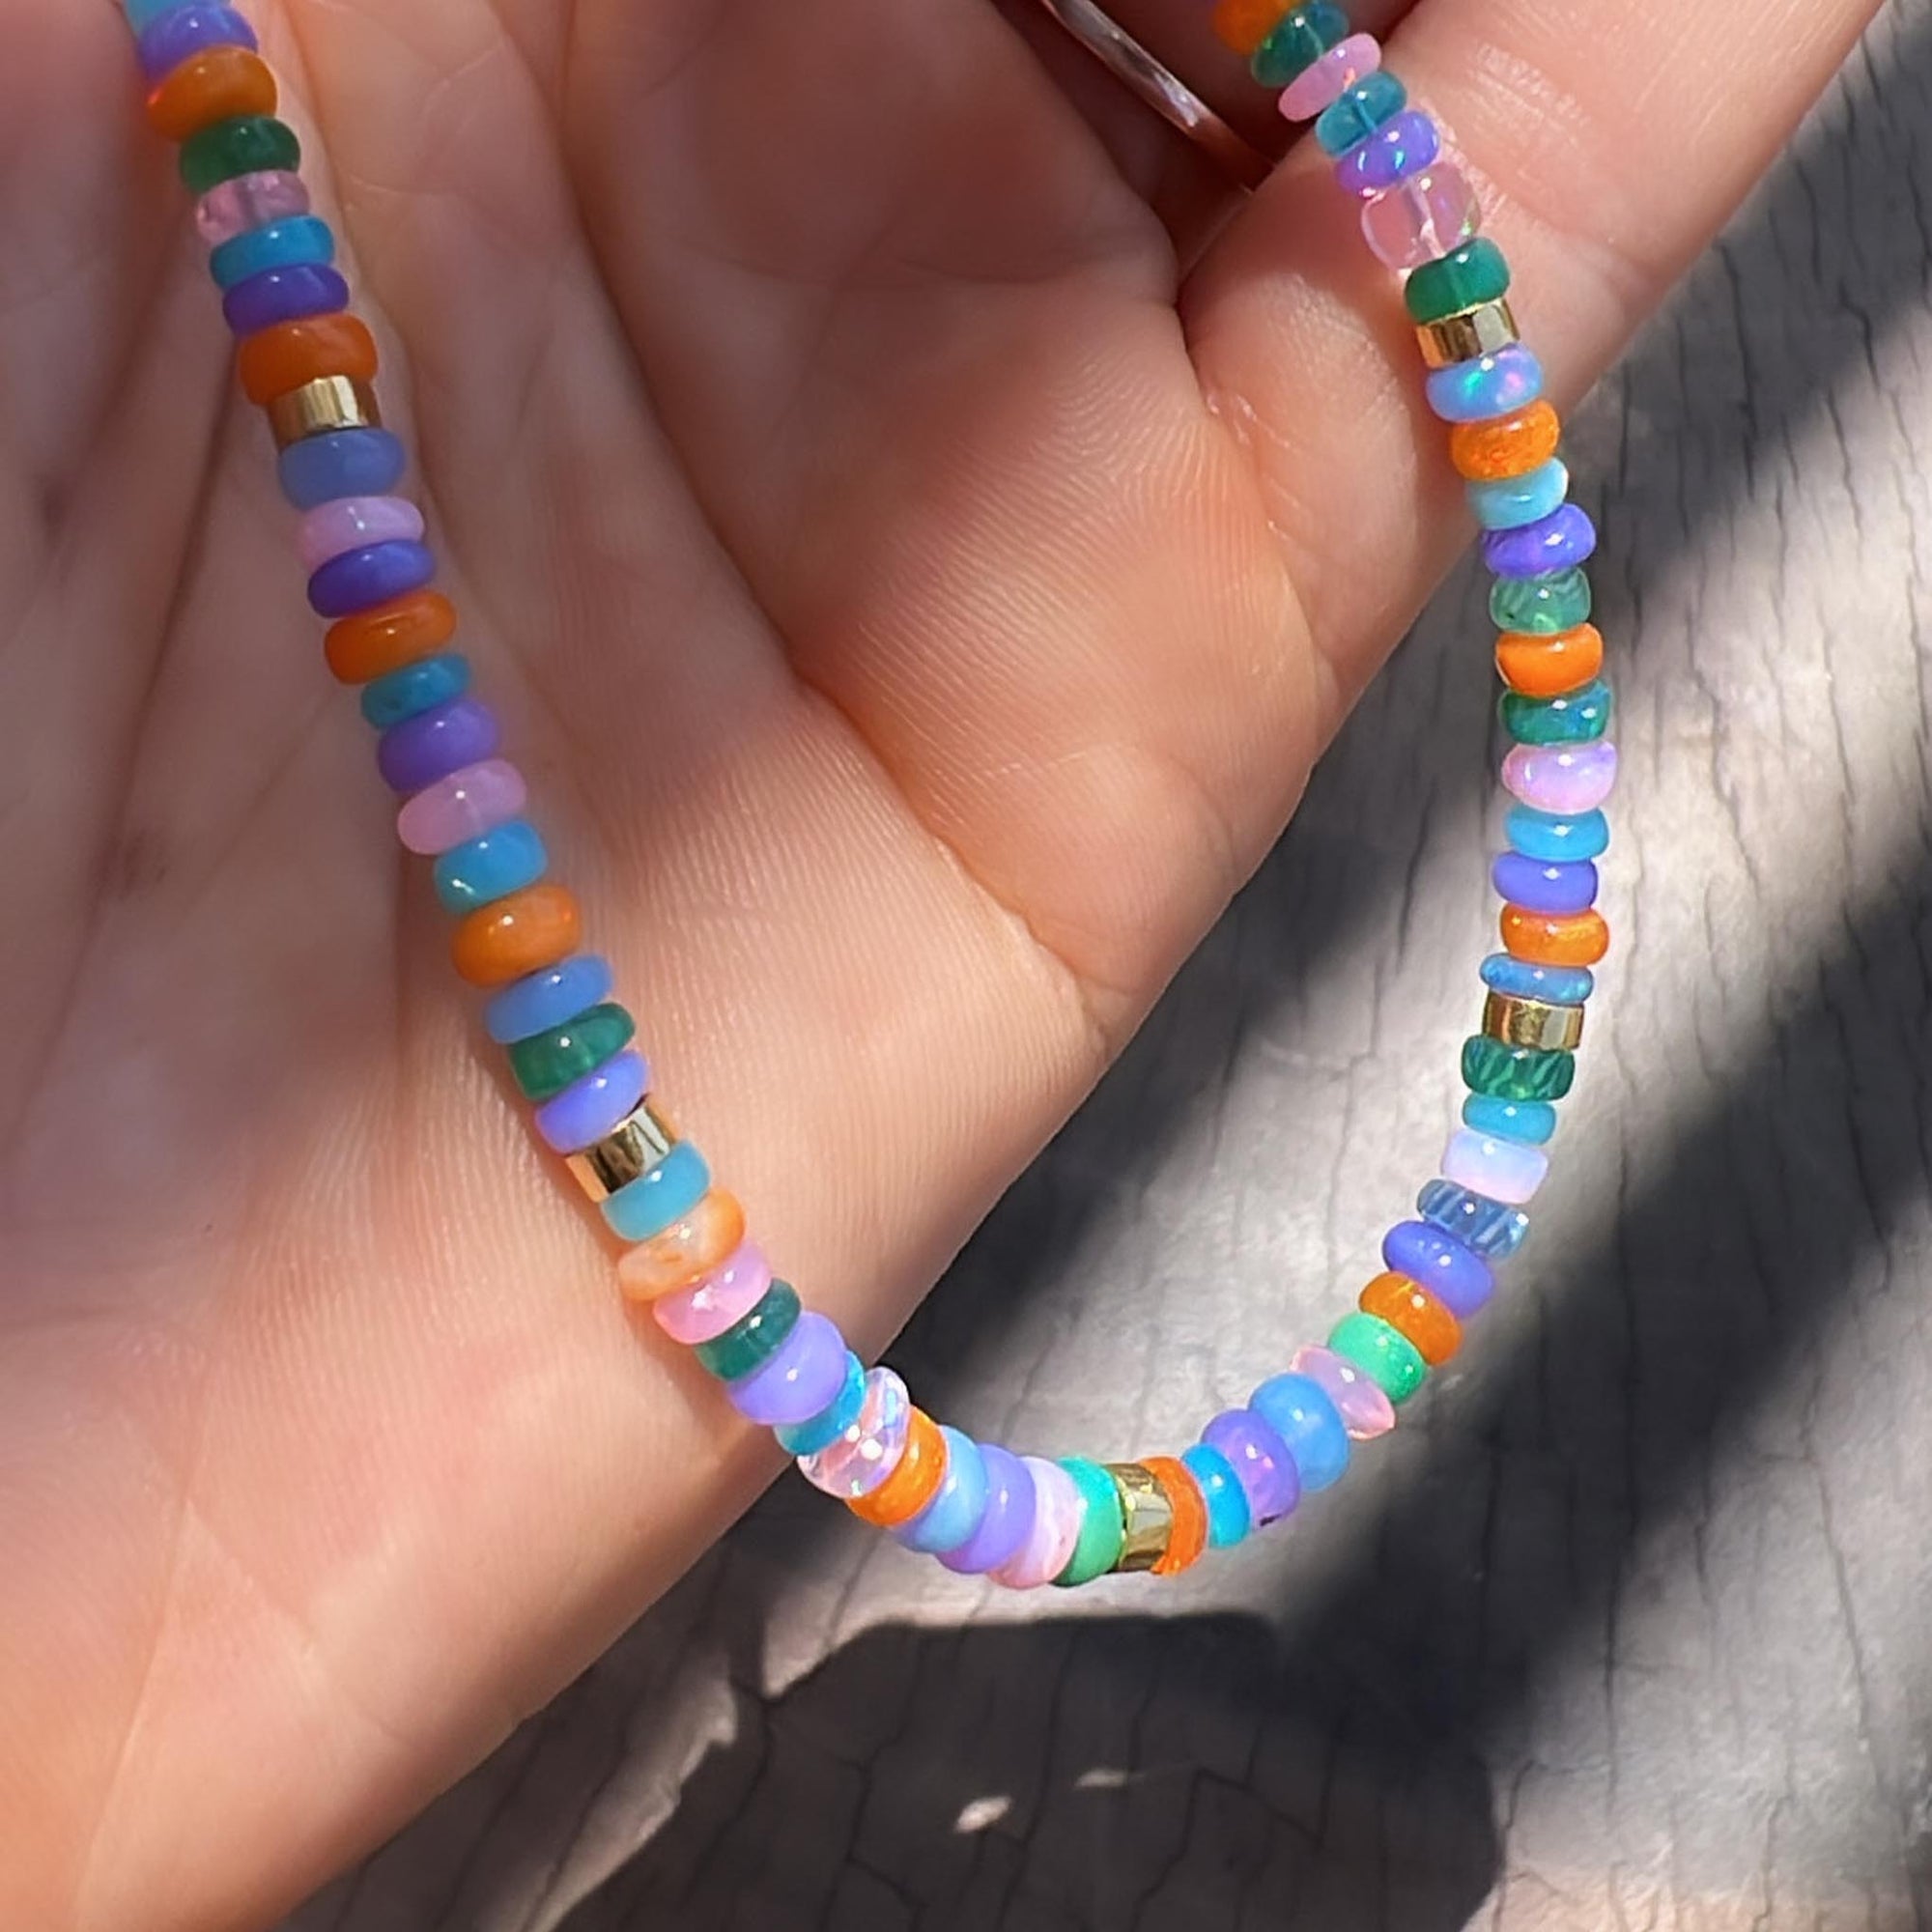 Pastel Colored San Todos Beaded Necklace